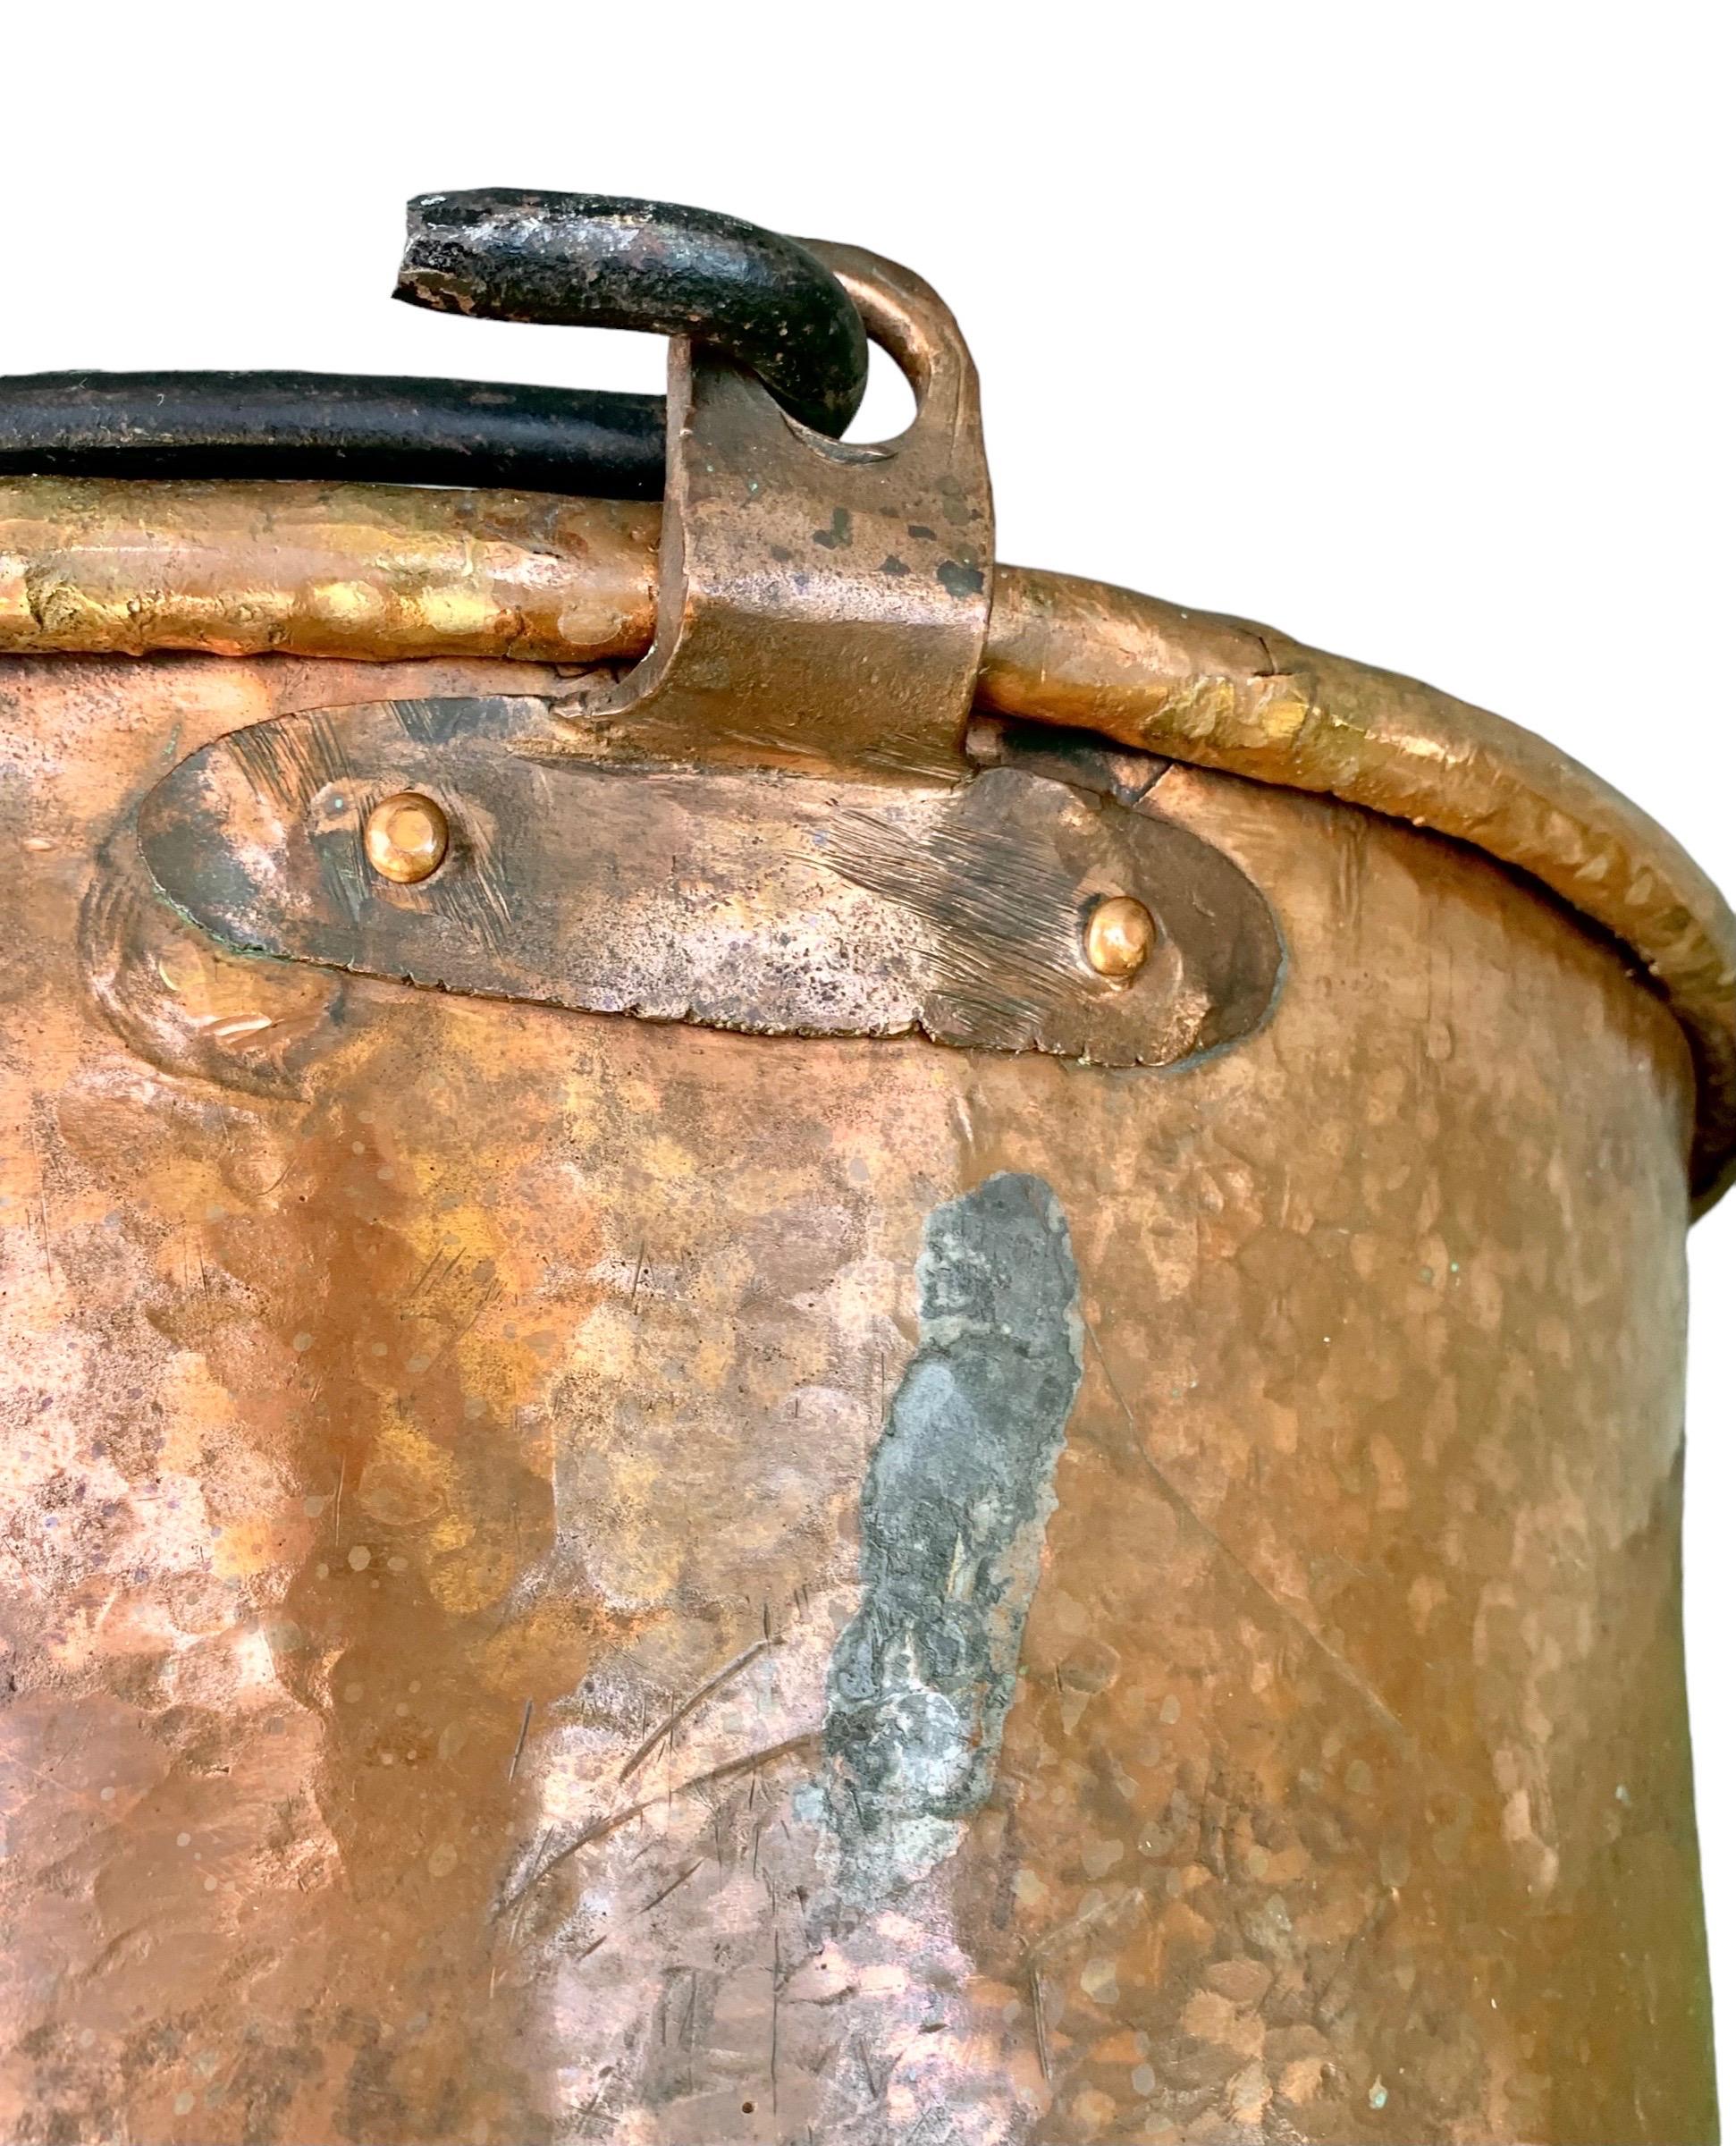 A large early 19th c., French Provincial hammered copper cooking pot/ cauldron with a riveted iron swing handle and hand rolled rim with an extraordinary old finish/patina.
Although I have not detected any markings, this piece was beautifully